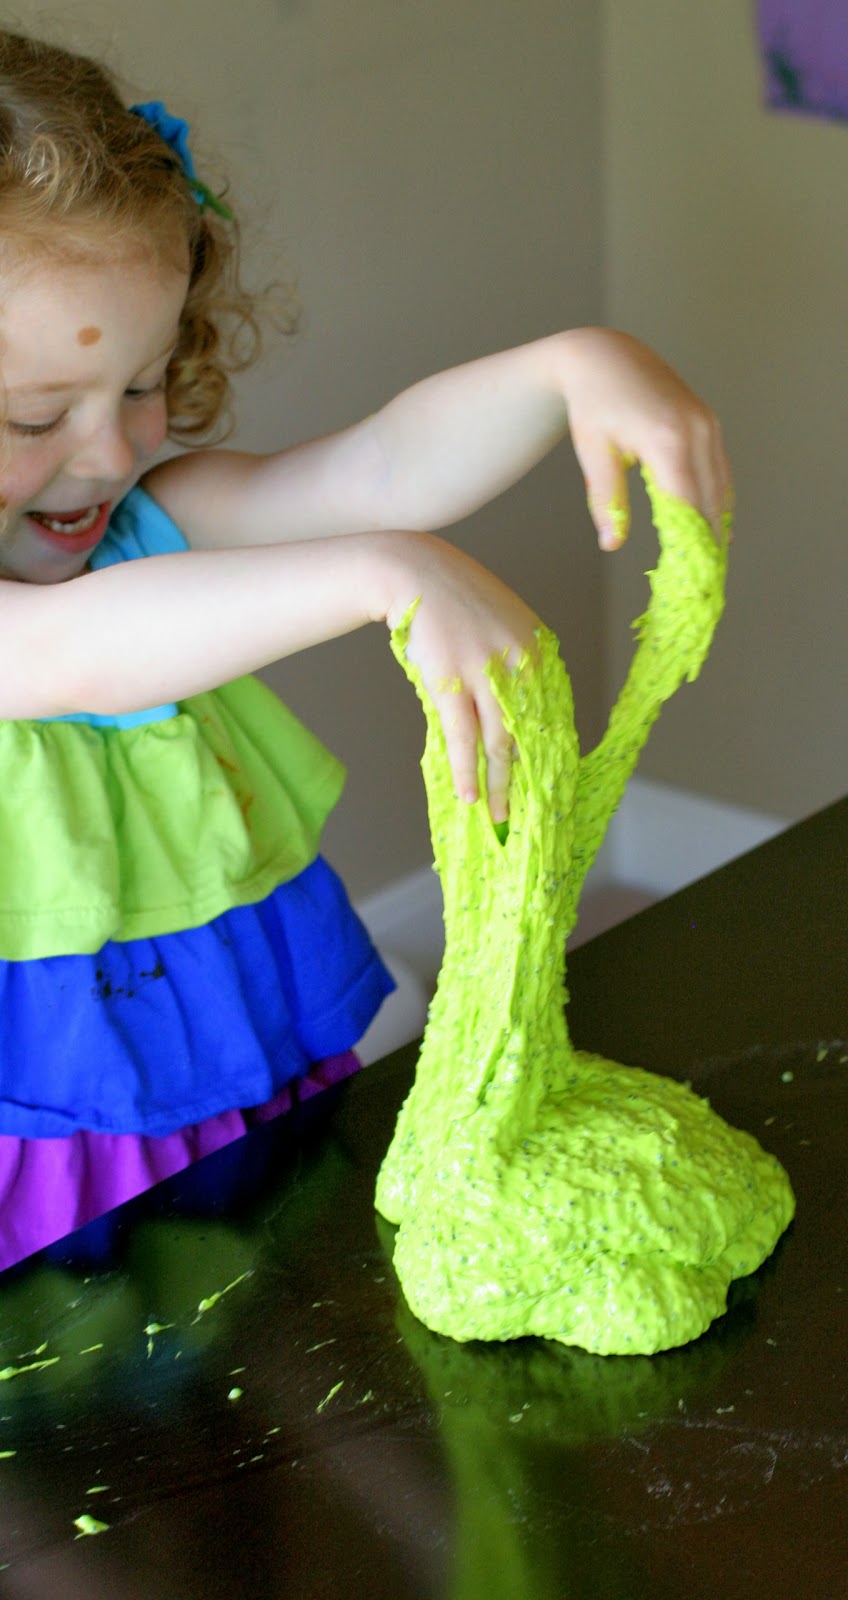 {New Recipe} All-Natural Edible Slime!  No cook recipe that's ready in less than 5 minutes.  Feels and acts just like traditional slimes without any chemicals!  From Fun at Home with Kids